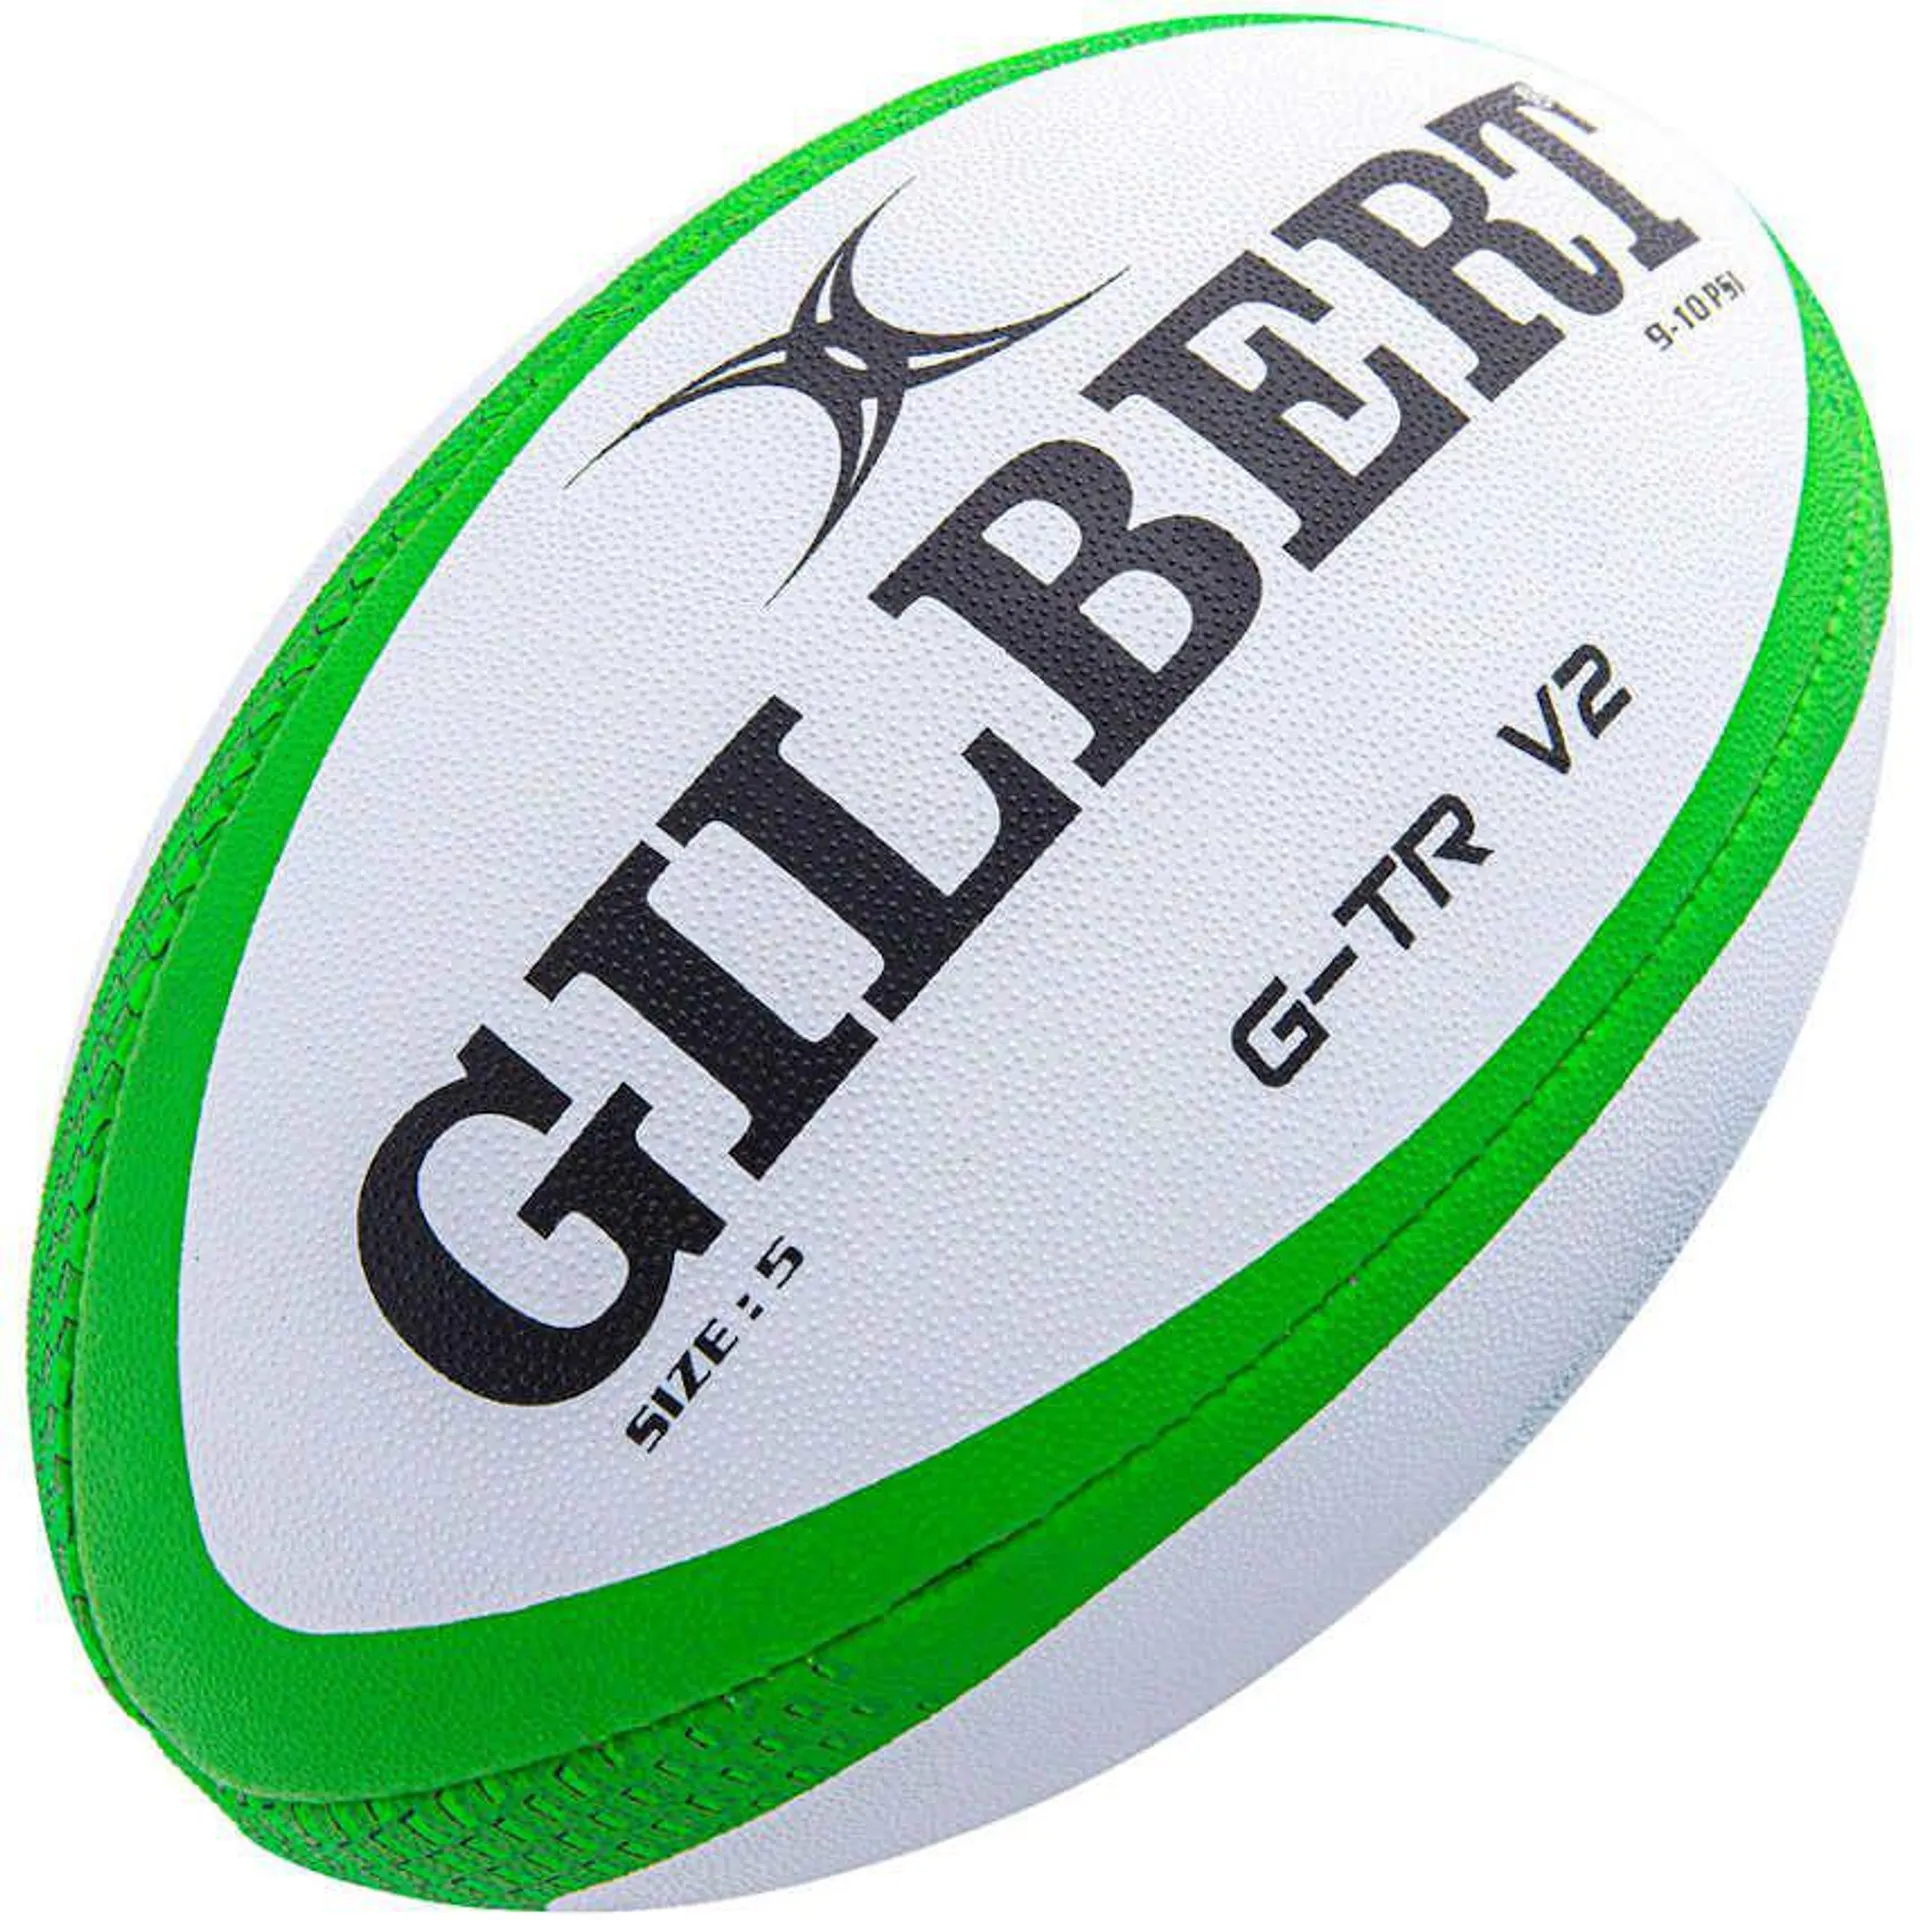 Ballon Rugby Entrainement GTR-V2 7S Taille 5 - Gilbert